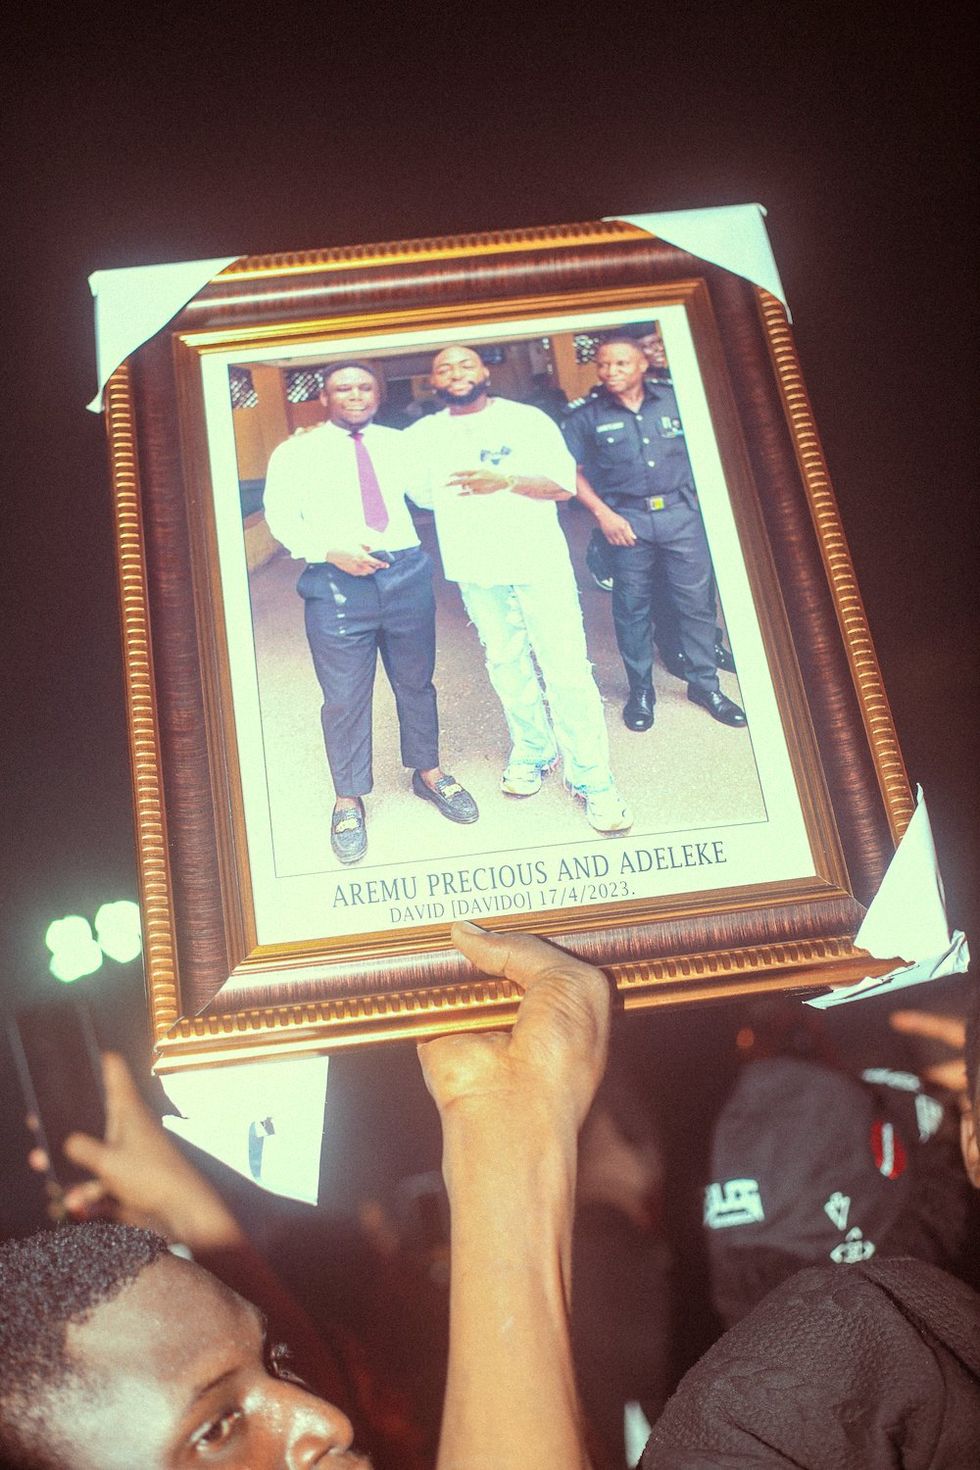 \u200bA man (Aremu Precious) holds a framed picture of himself and Davido at the concert.